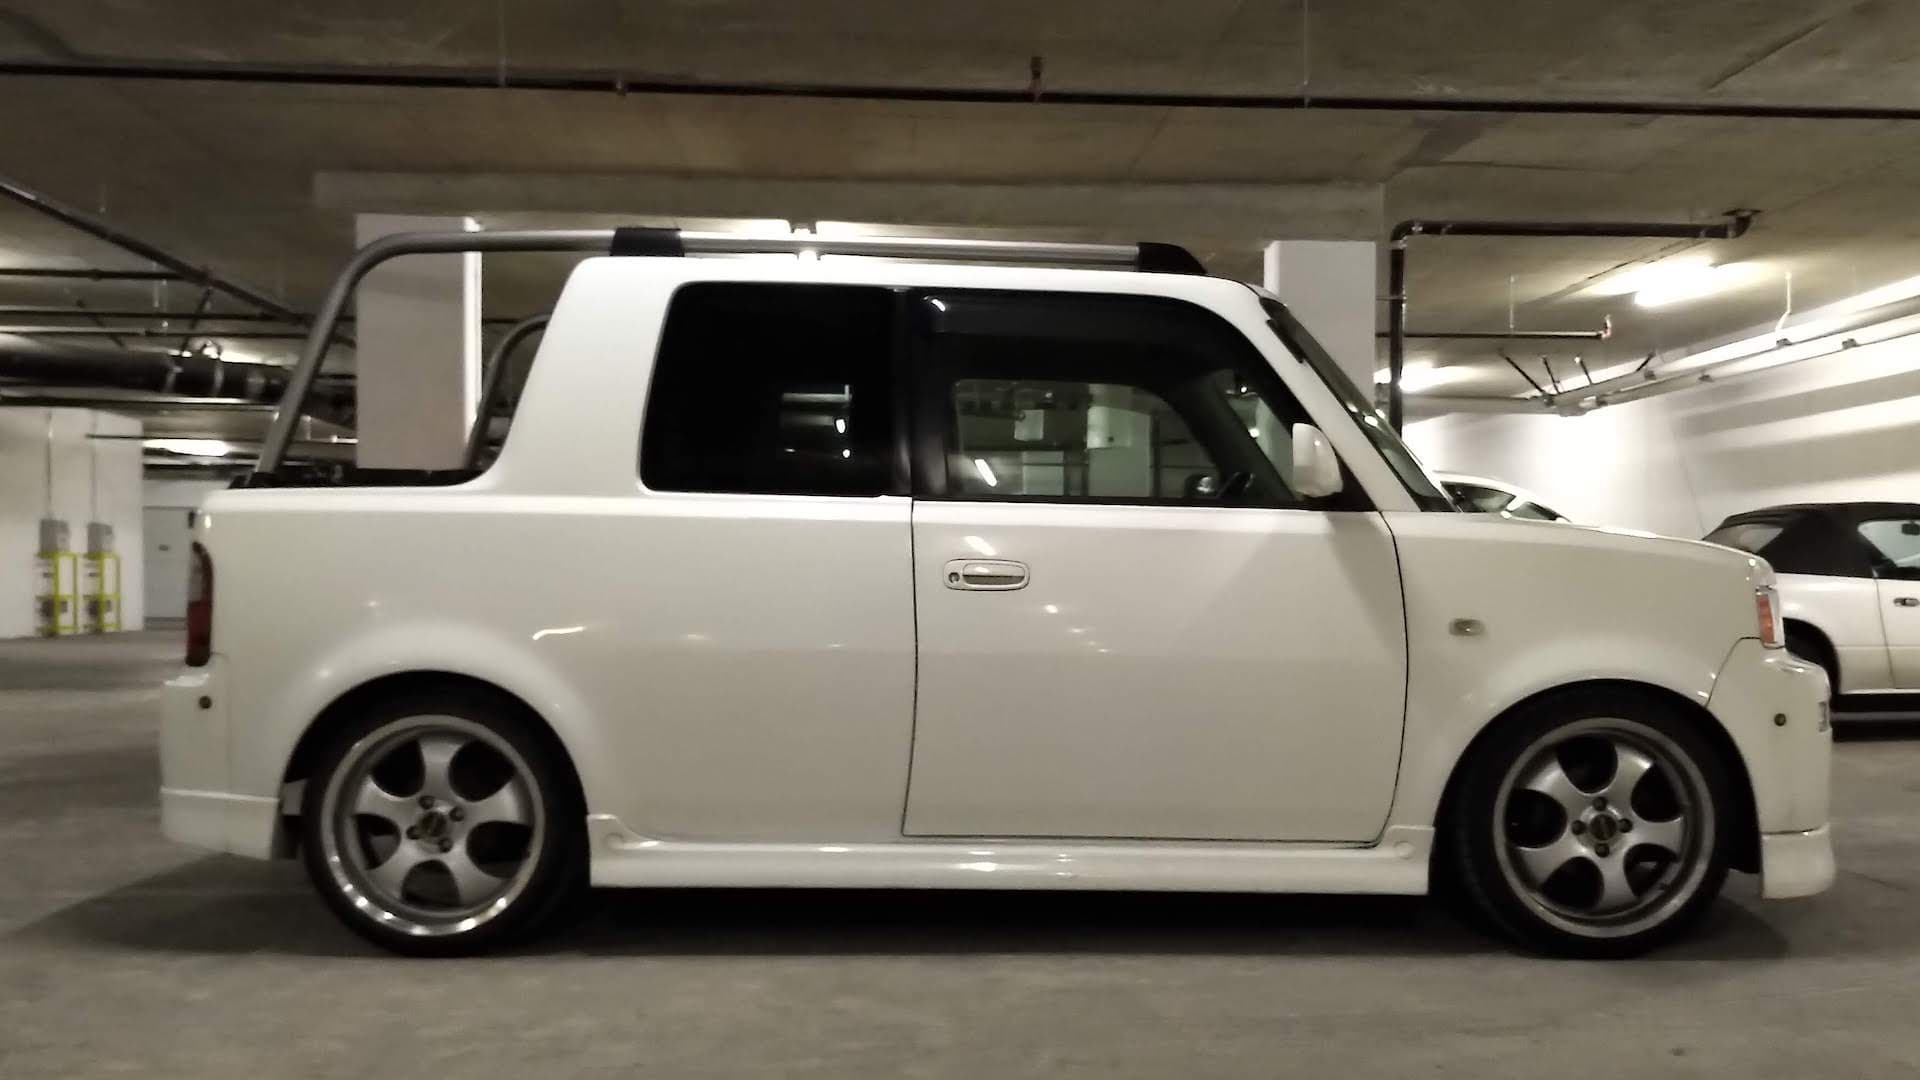 The Toyota bB Open Deck Is the Scion xB Pickup Truck We Never Got Stateside